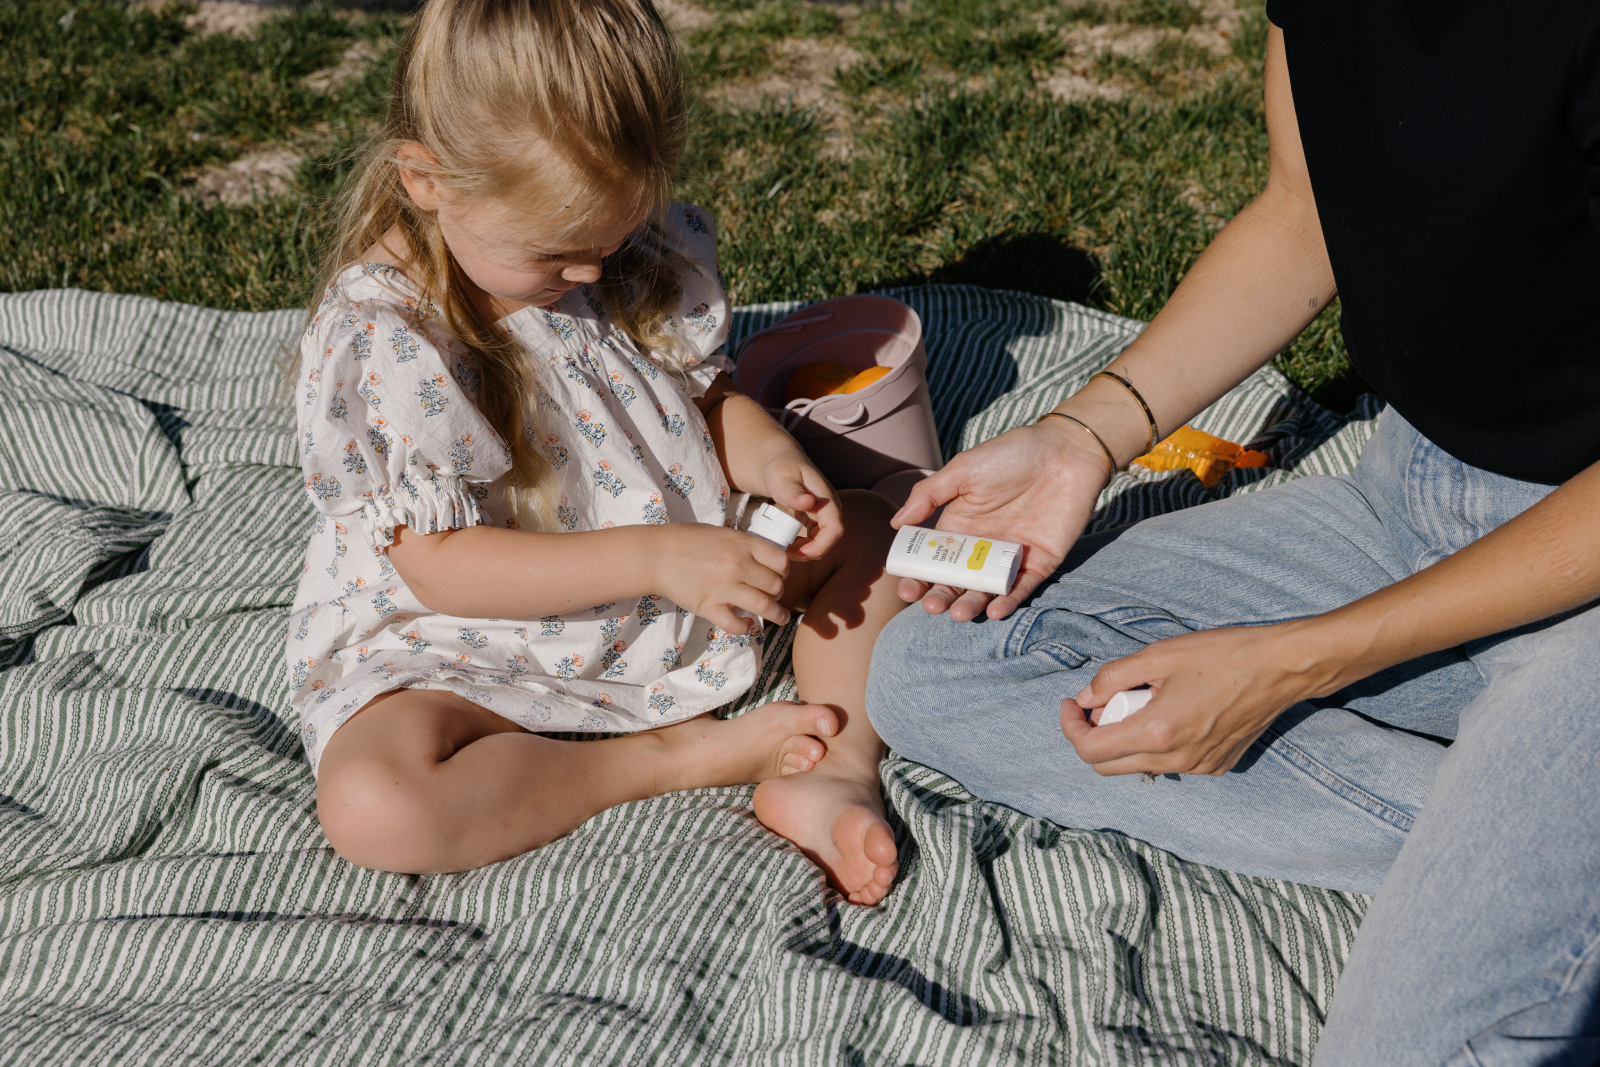 Little girl sitting on picnic blanket with sunscreen stick